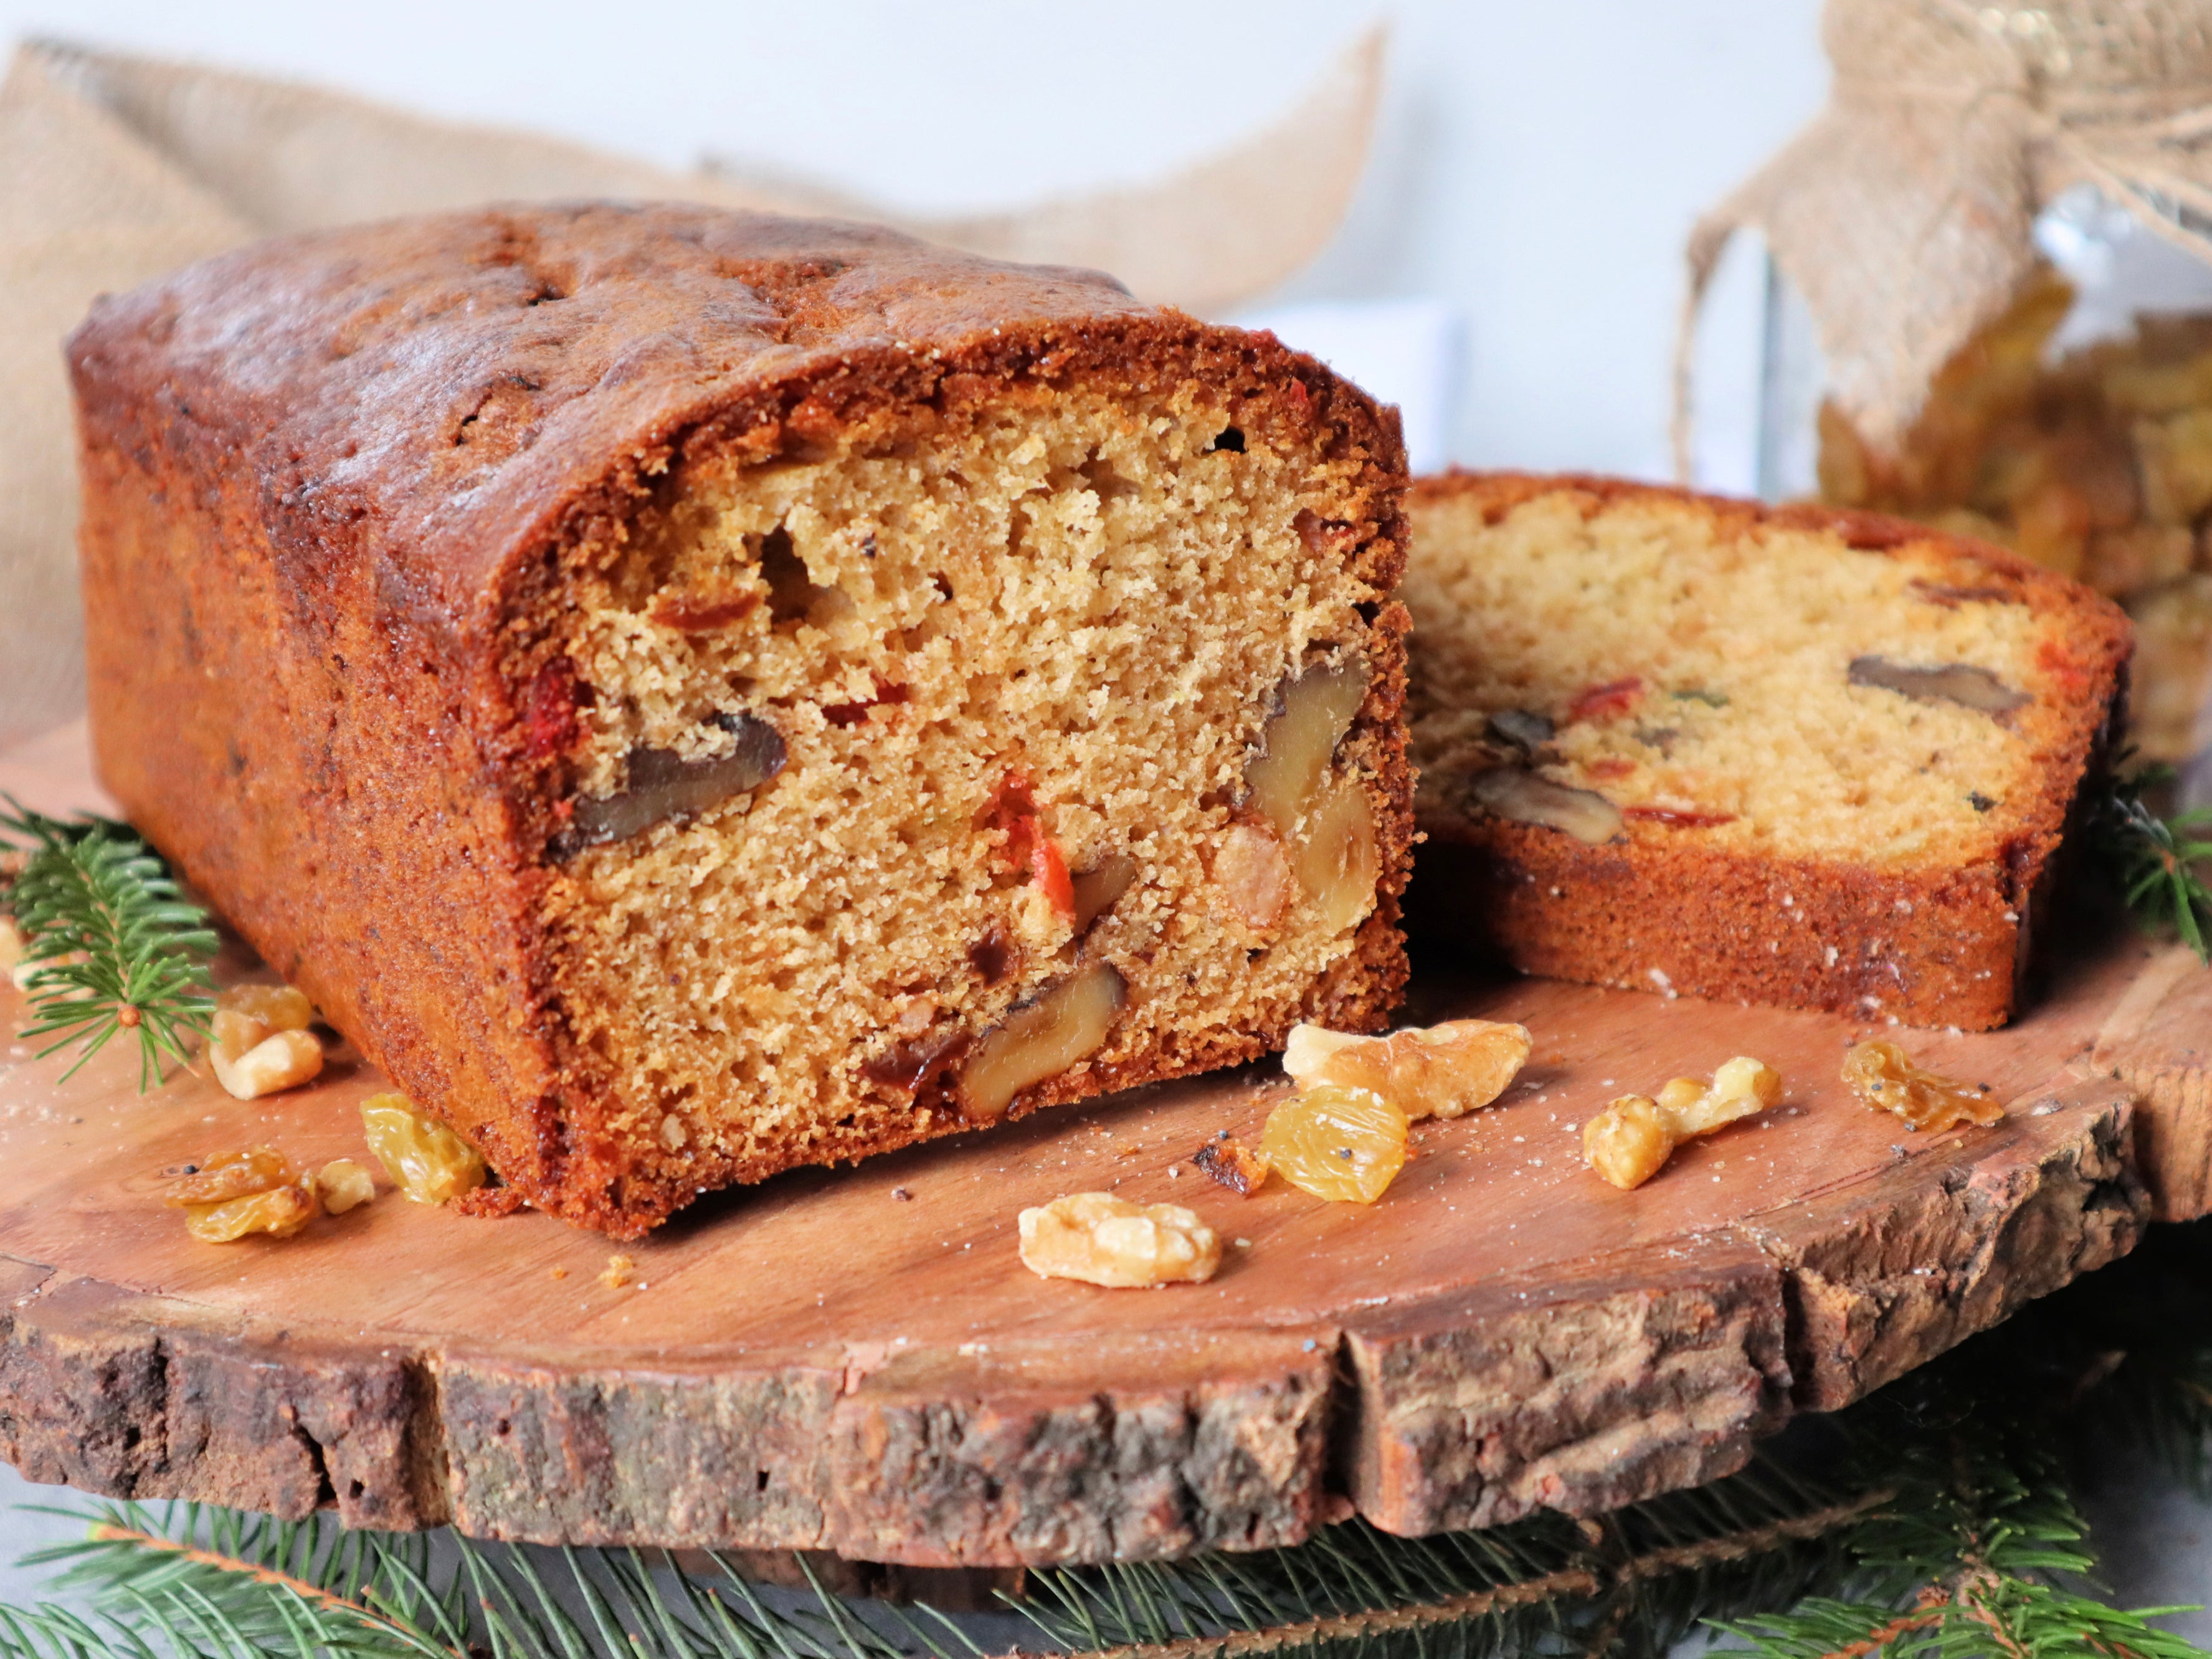 For Love of the Table: Brandied Fruit & Almond Pound Cake